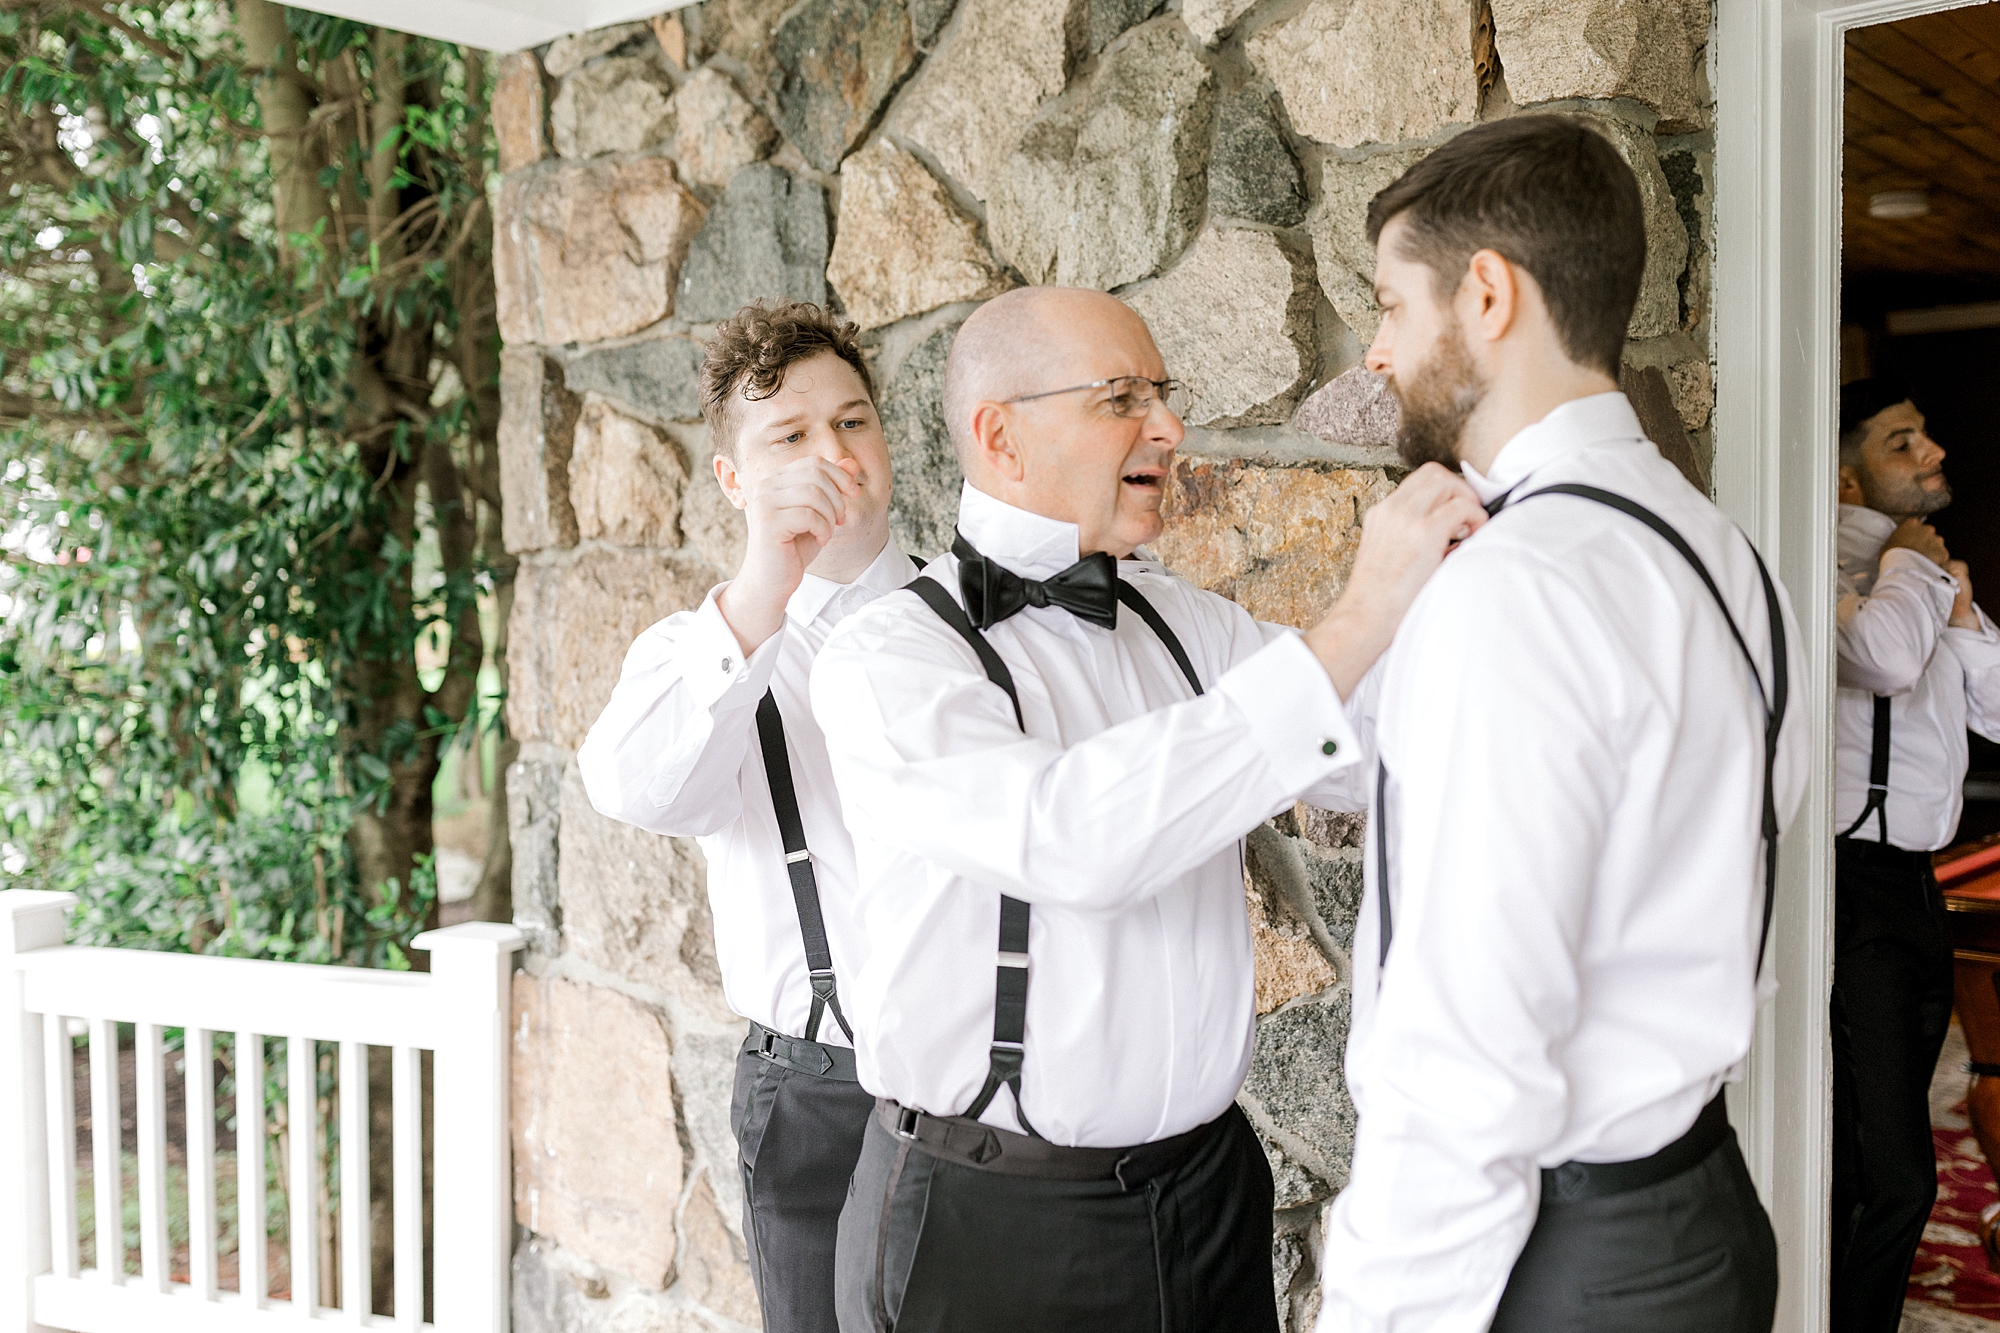 father helps groom into bowtie and suspenders before NJ wedding